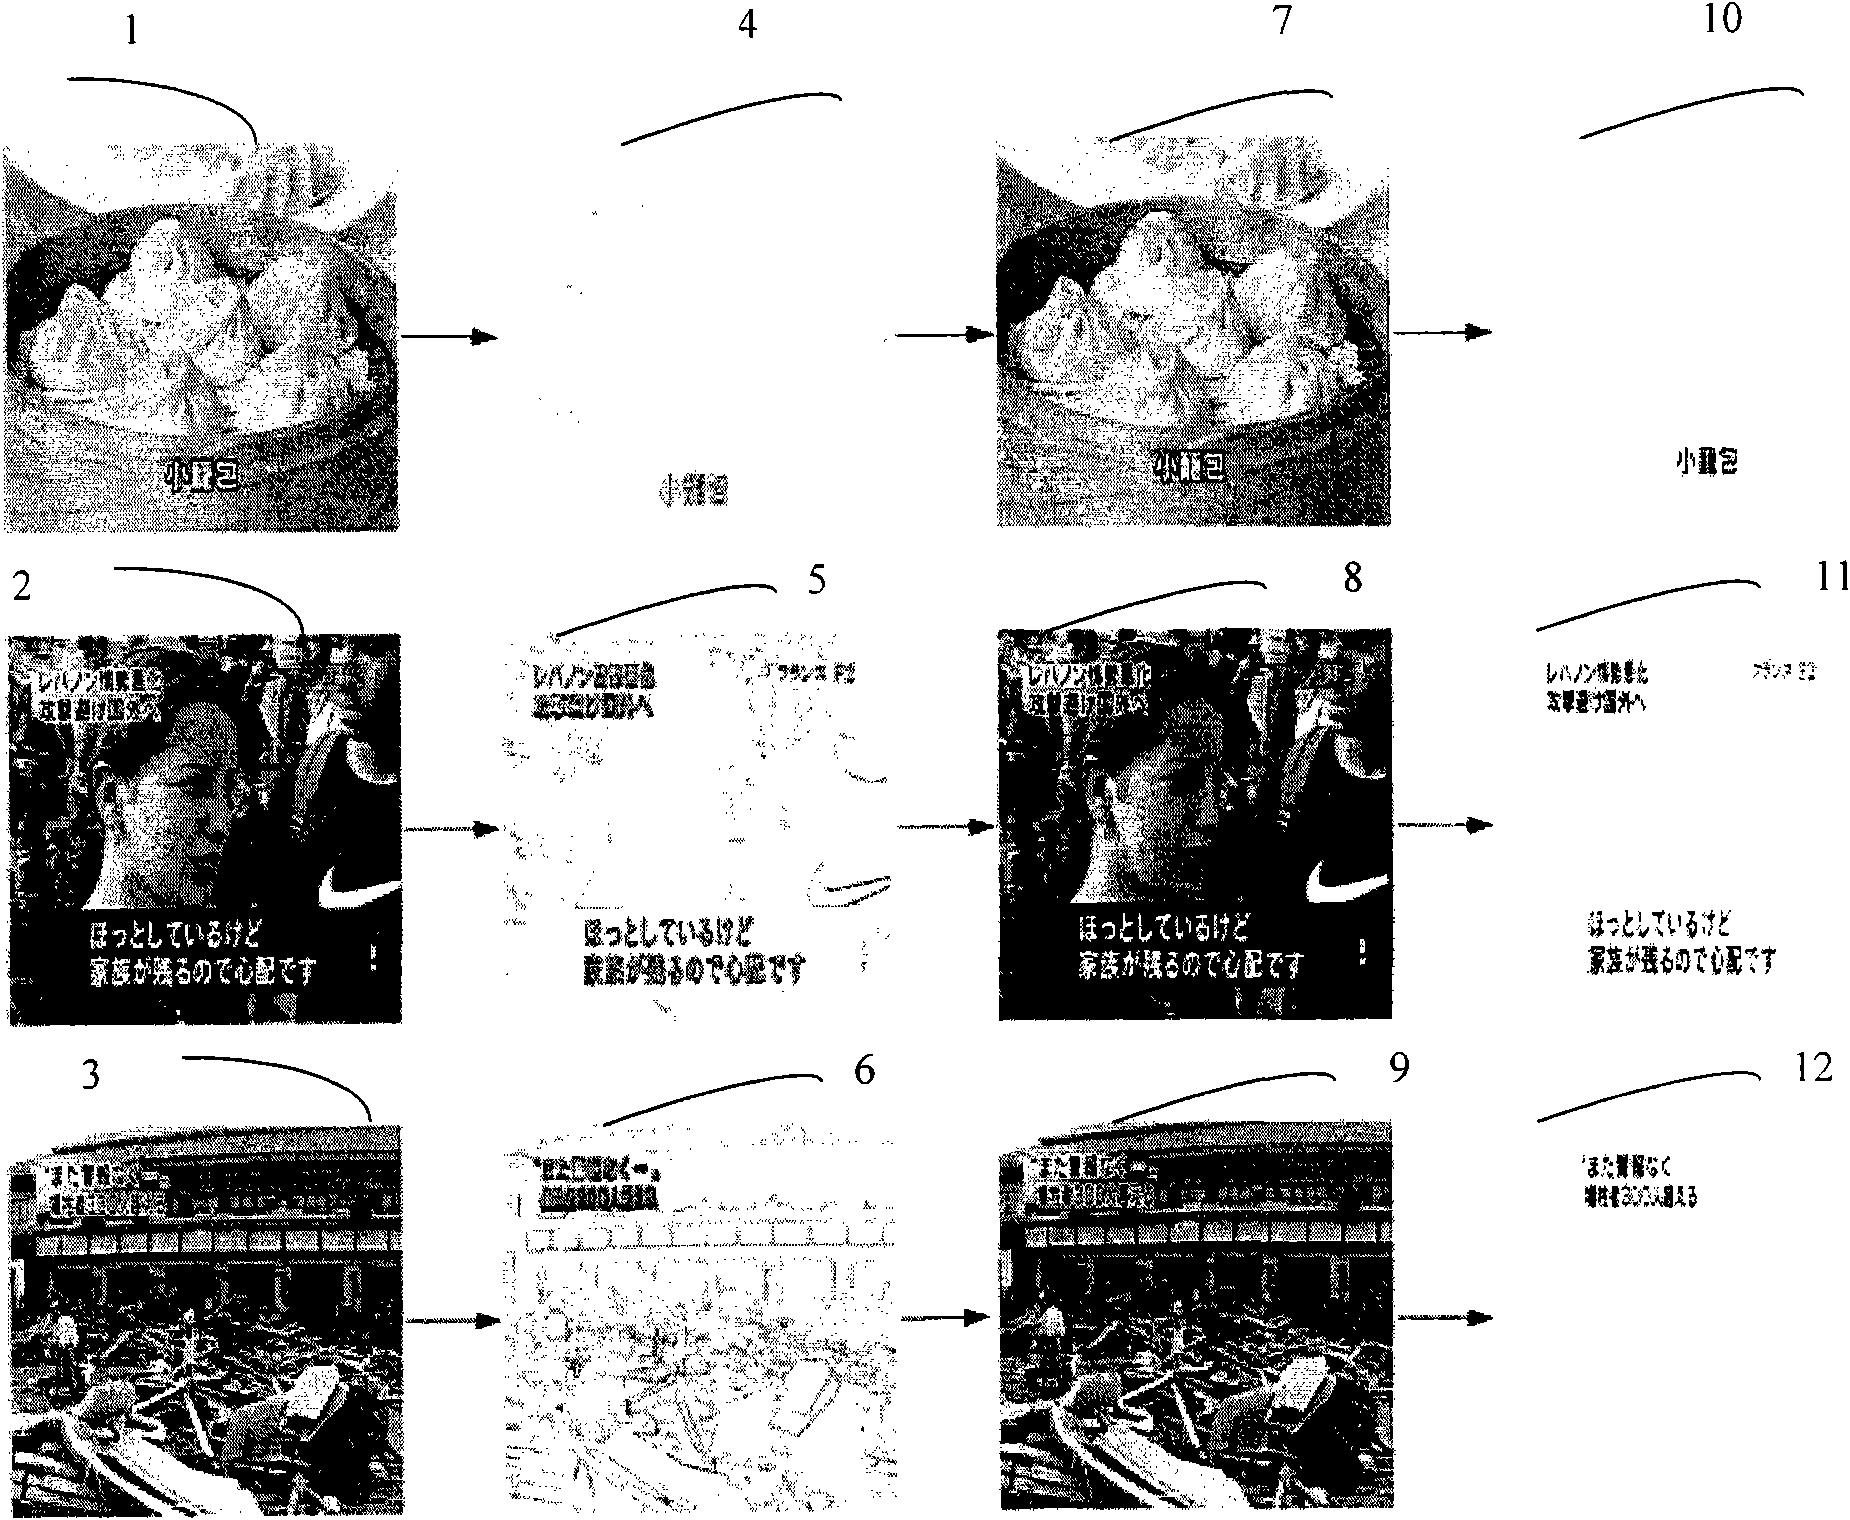 Method for extracting text information from adaptive images